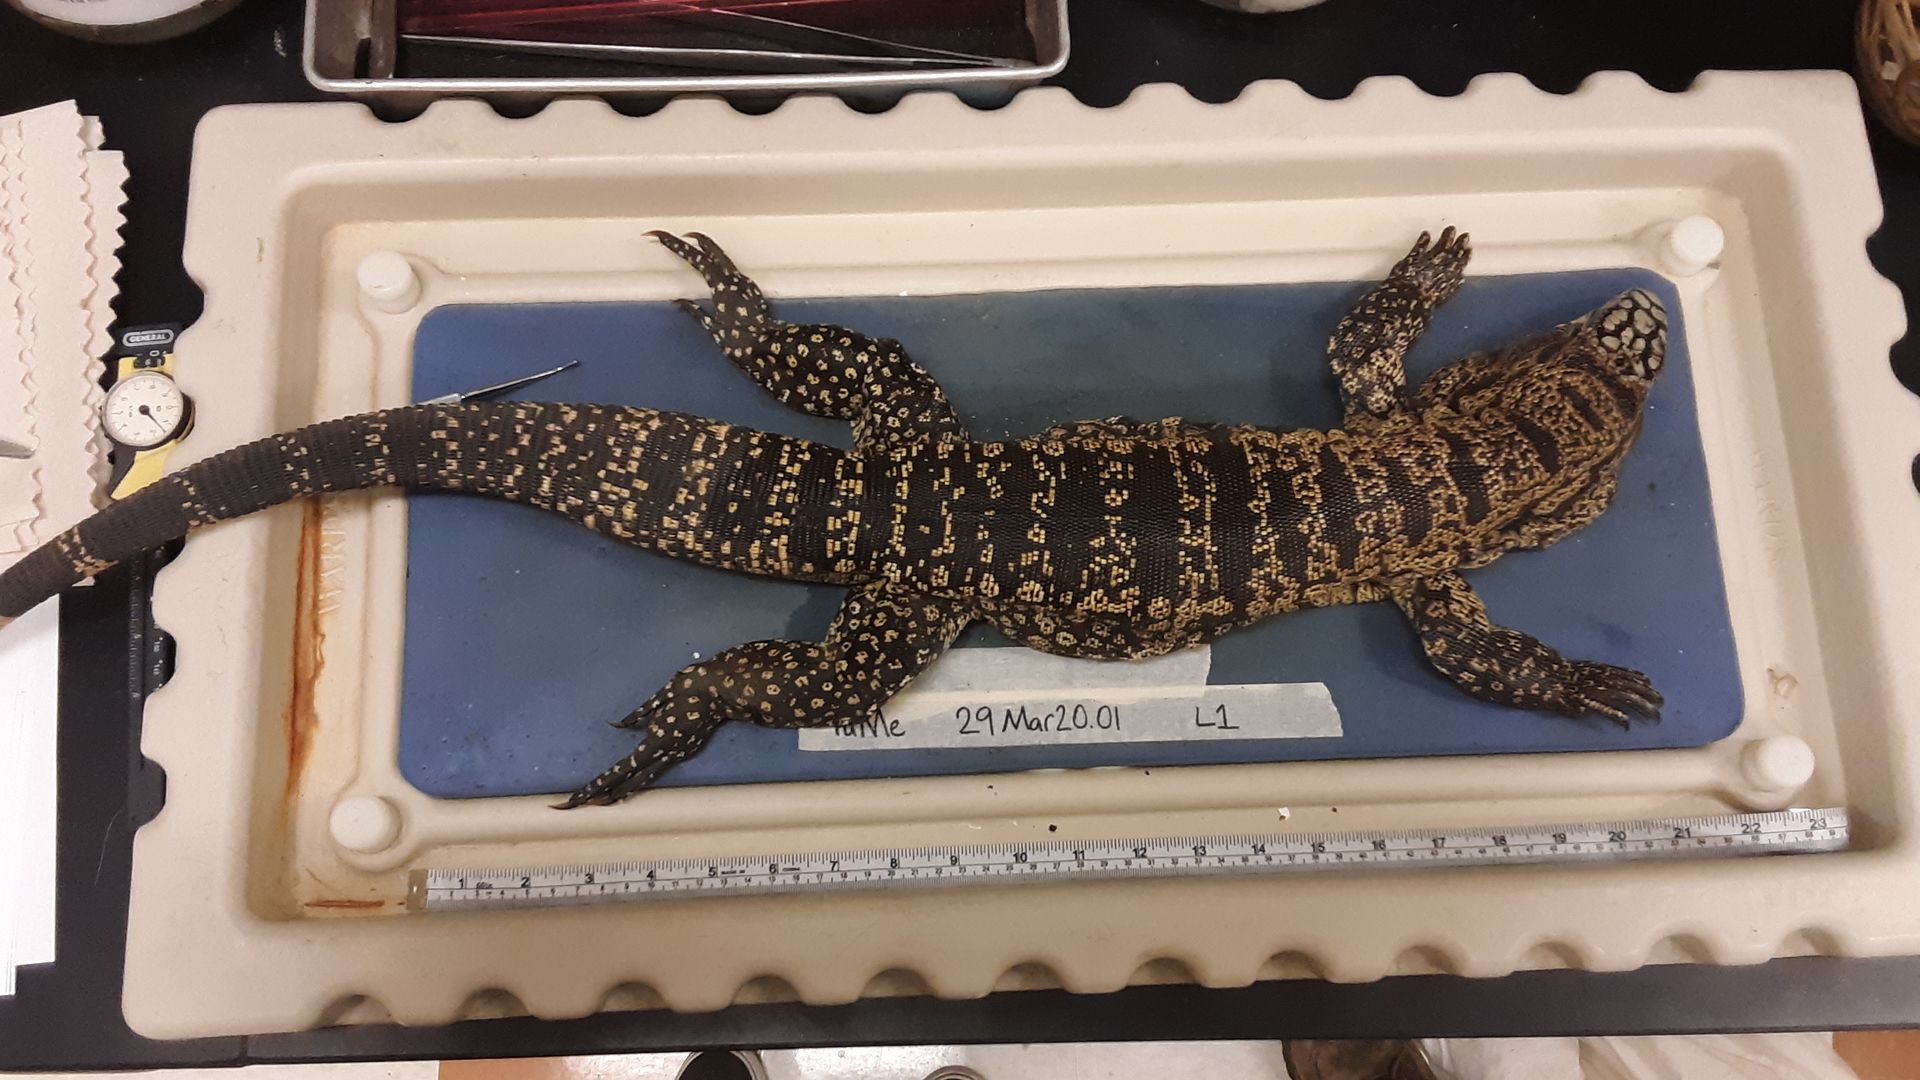 A black-and-white South American tegus lizard is displayed on a table